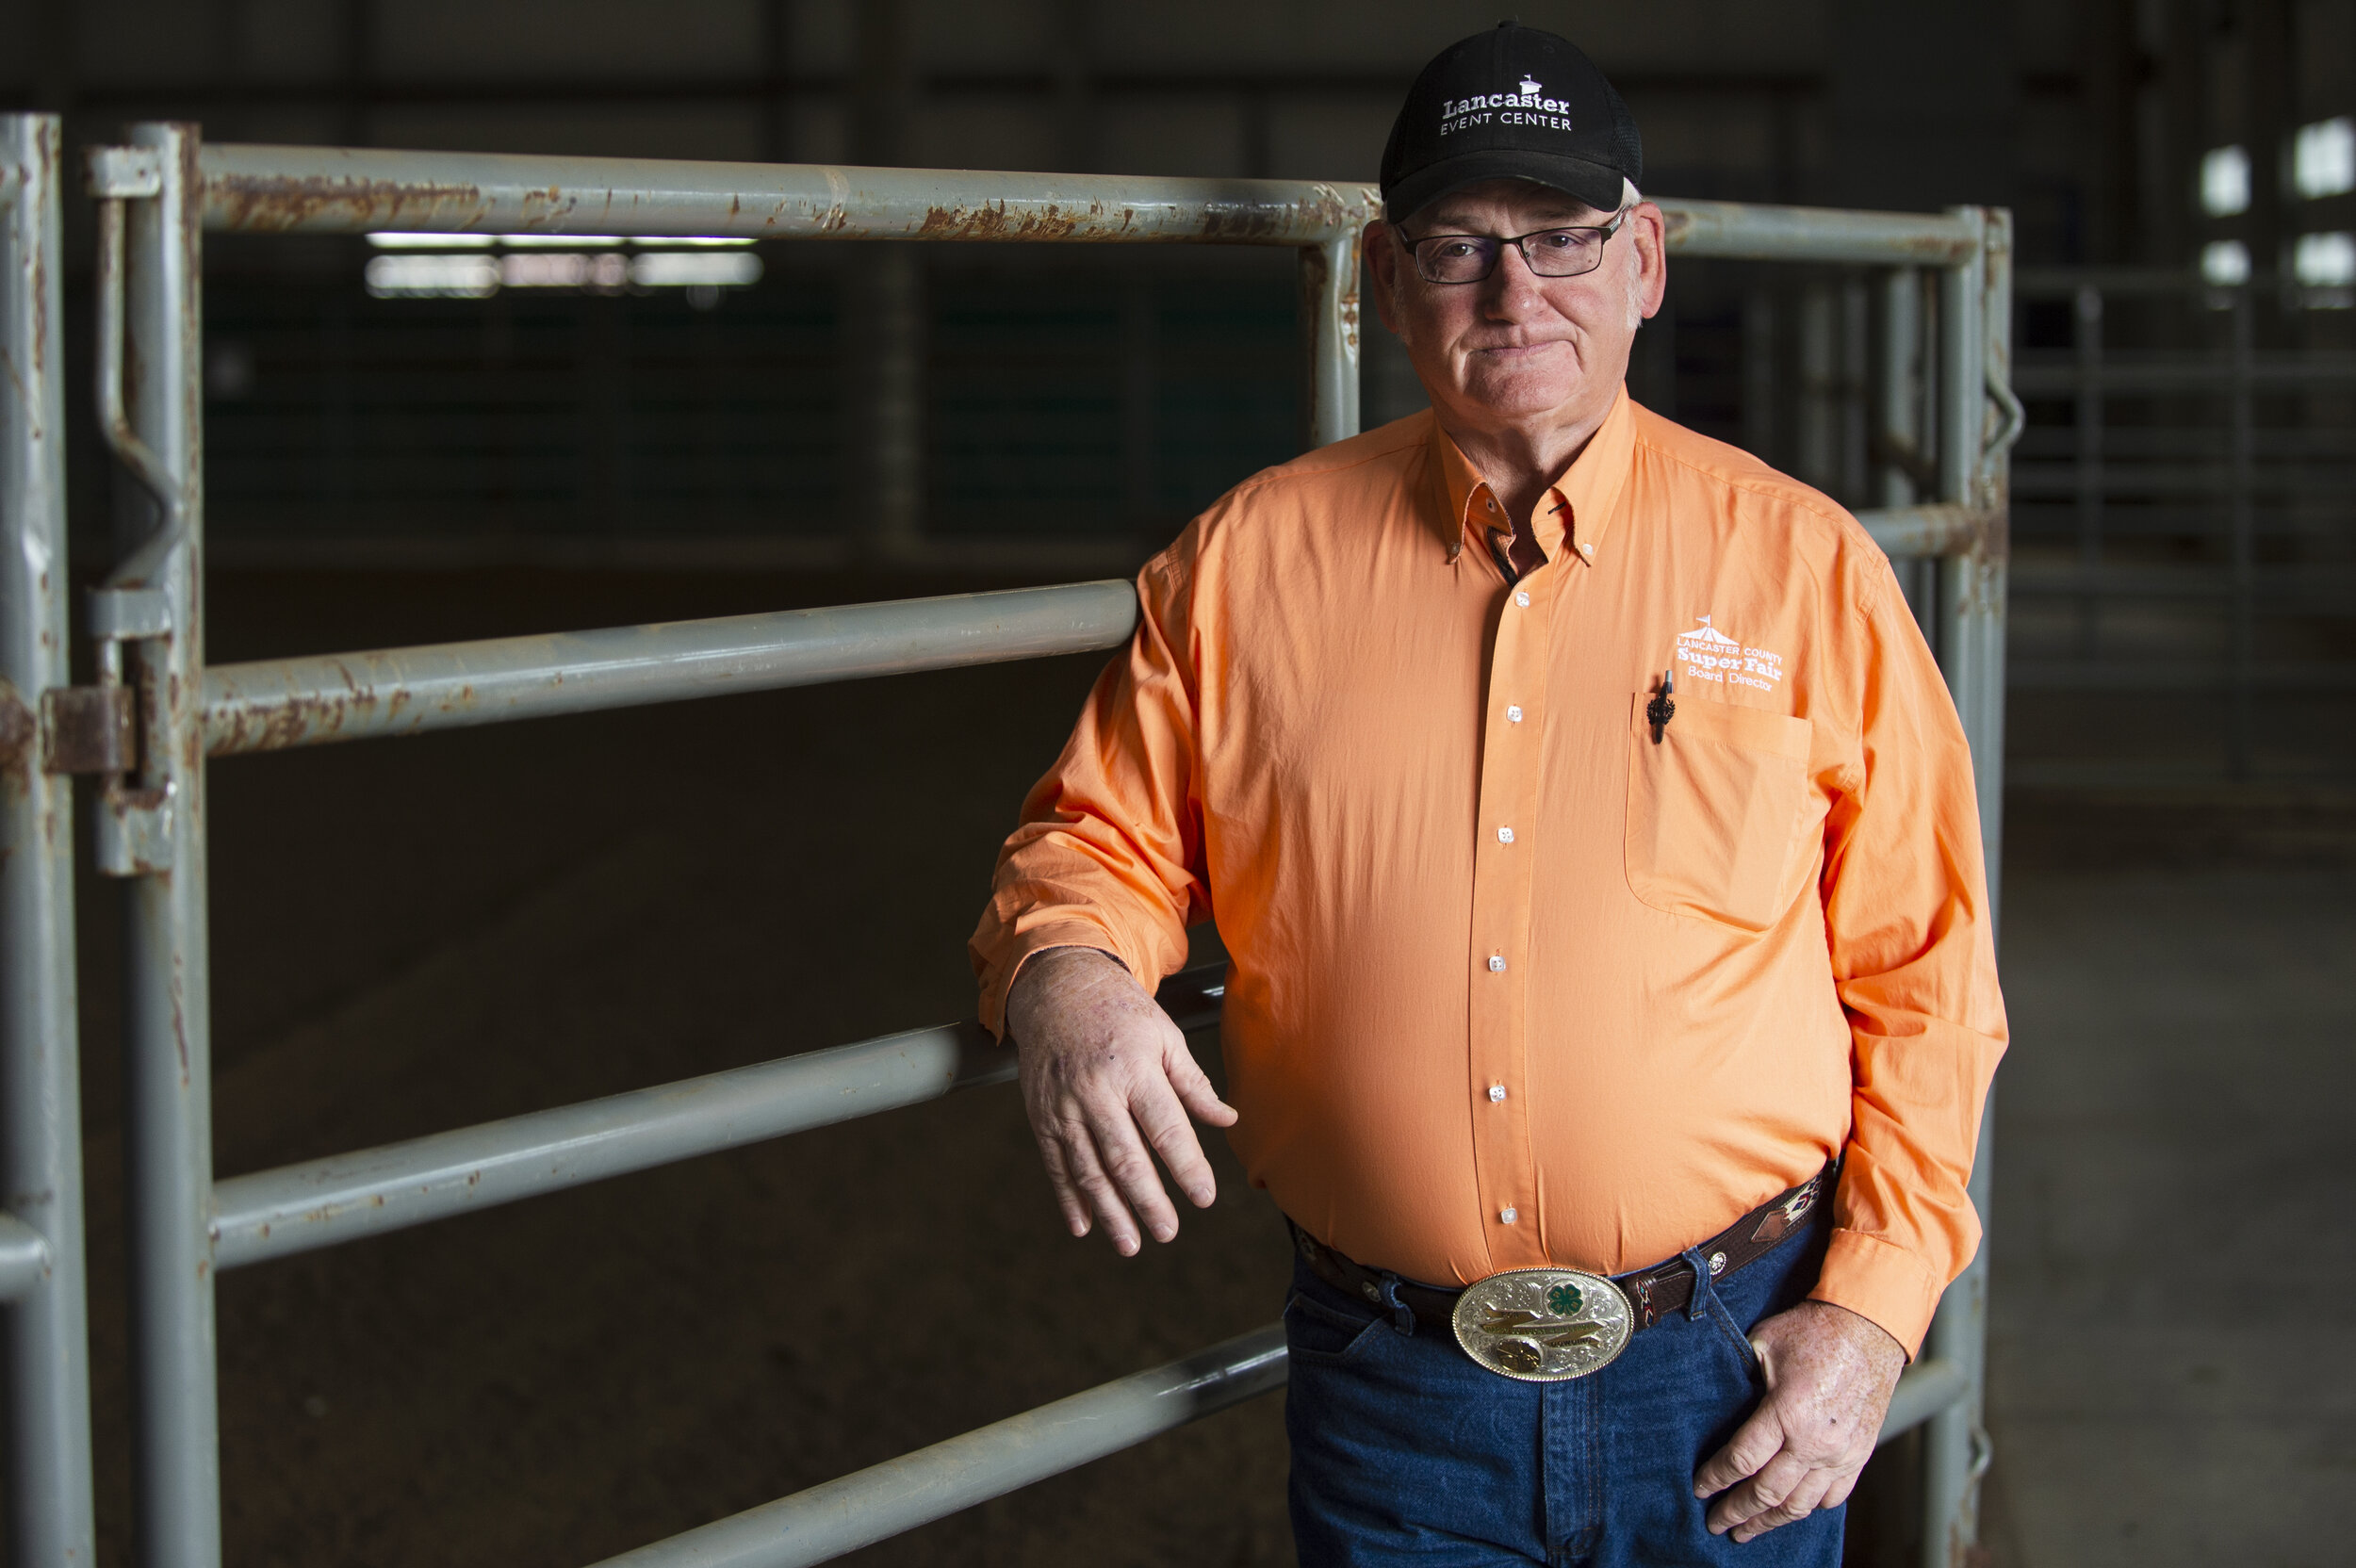  Ron Dowding, past president and current vice president of the Lancaster Event Center board, poses for a portrait at the Lancaster Events Center on Friday, August 07, 2020, in Lincoln, Nebraska. KENNETH FERRIERA, Journal Star.  